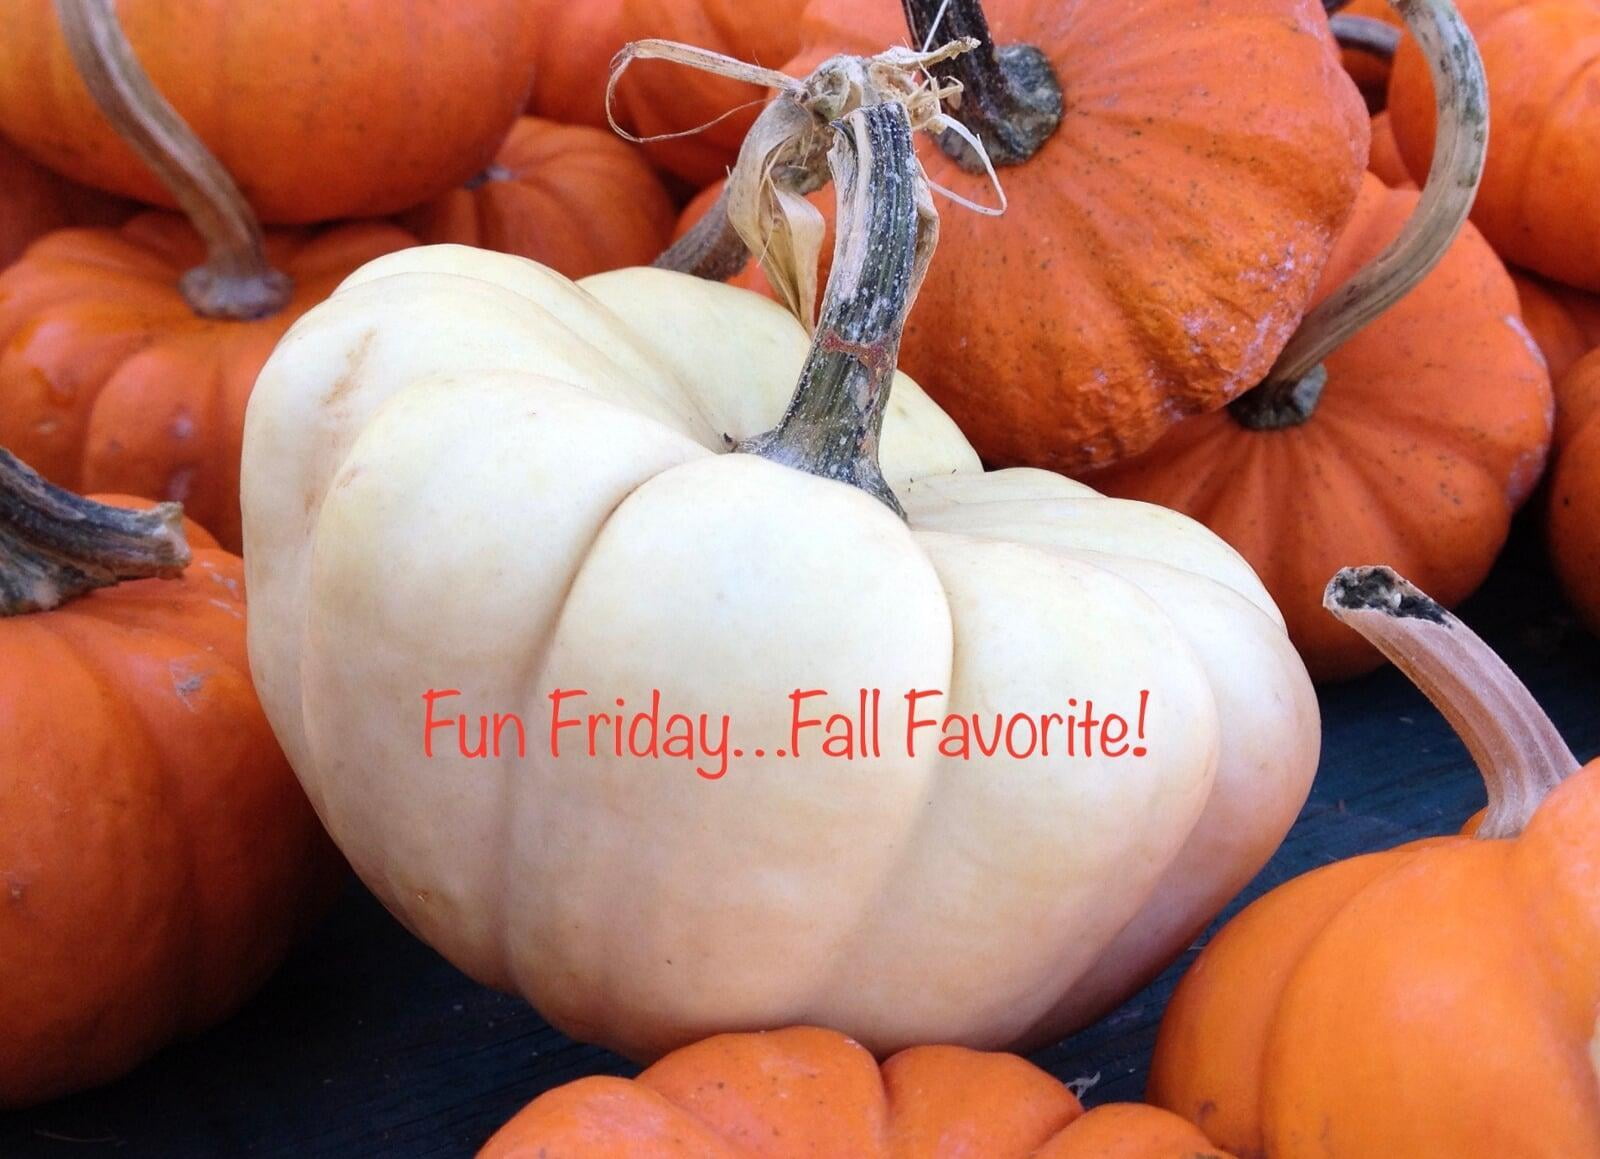 Fun Friday...A favorite for fall!